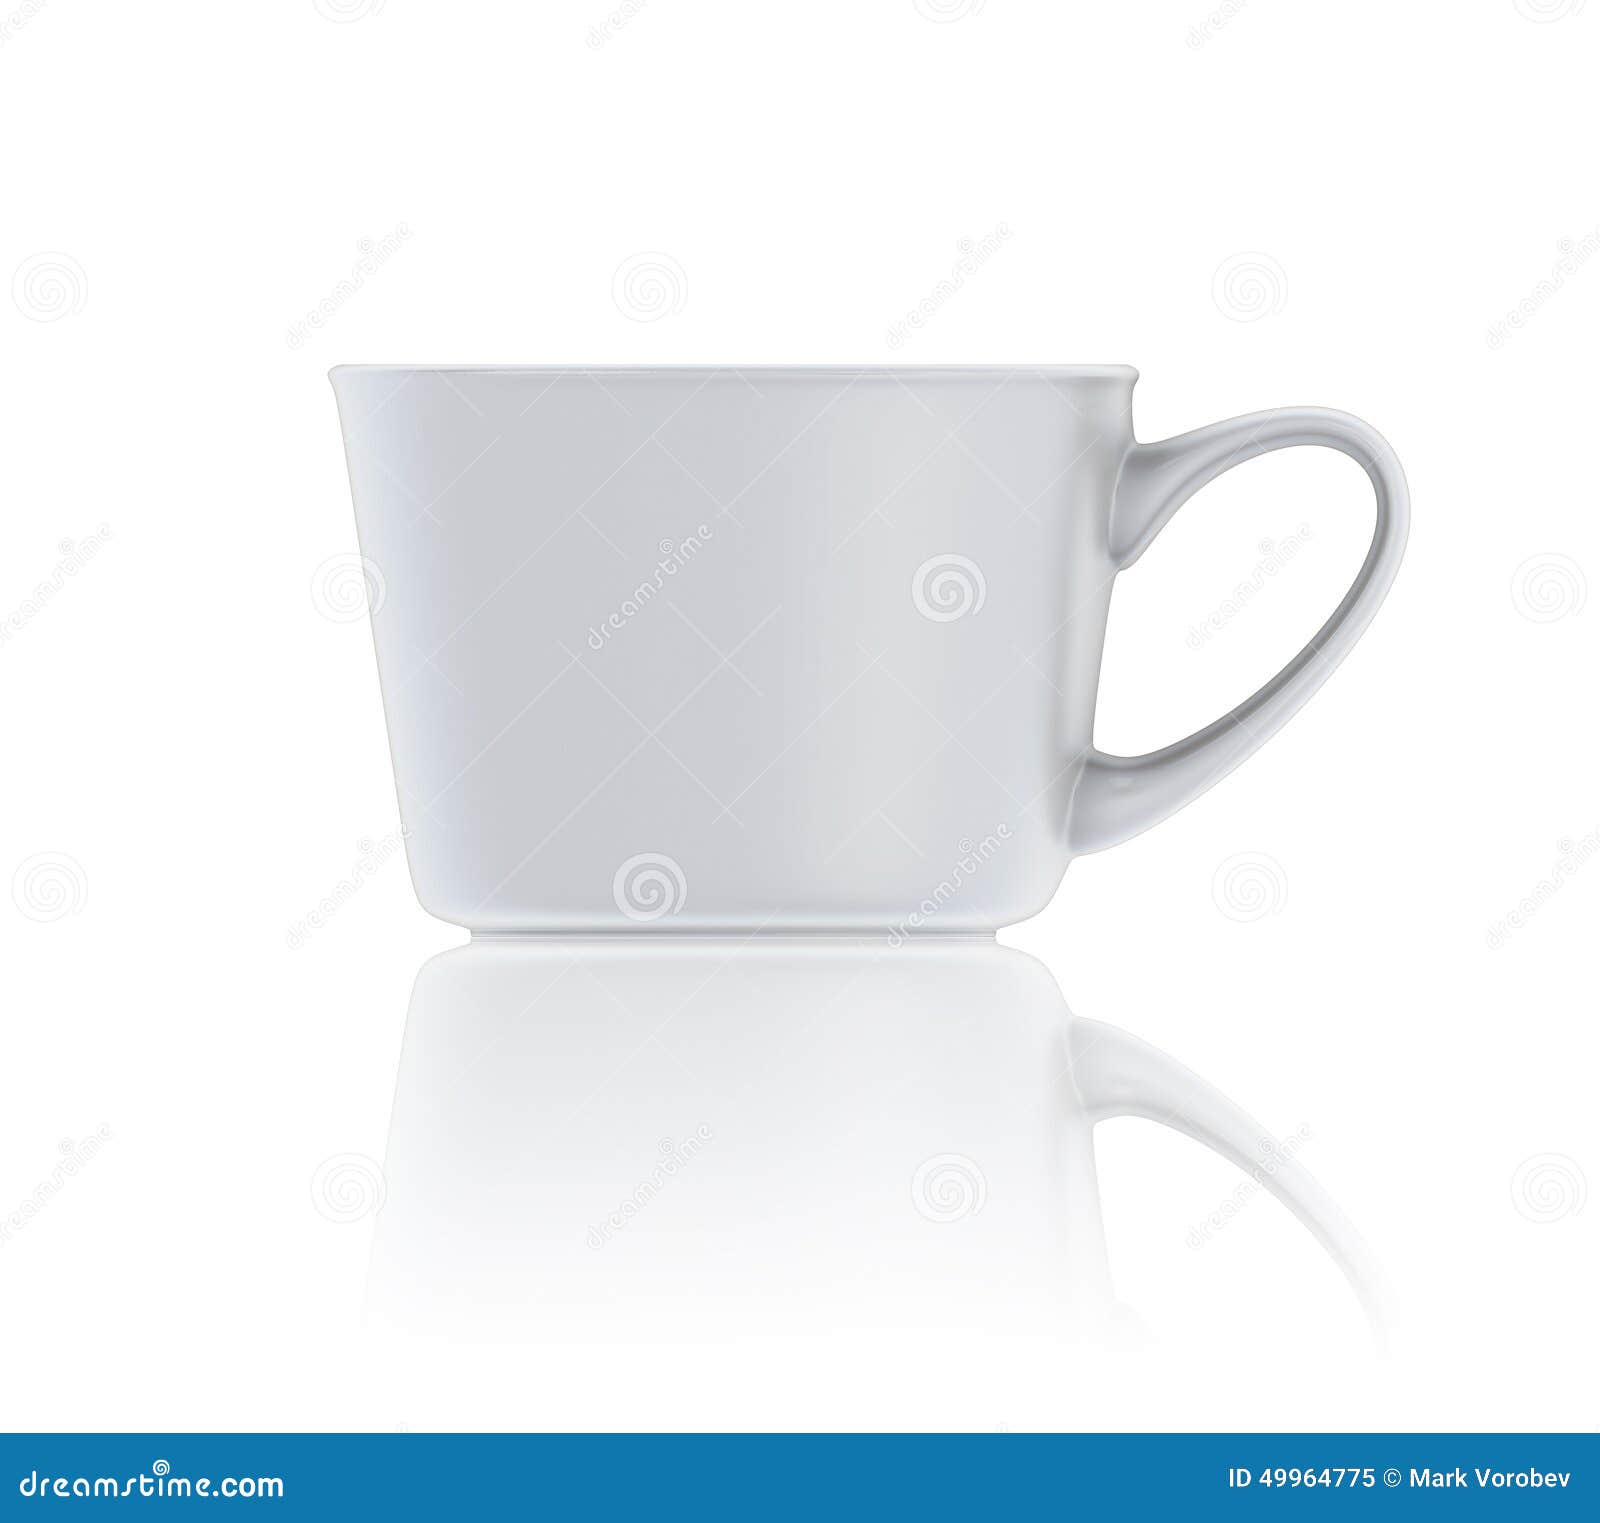 Collection 98+ Images front view of a coffee cup Updated